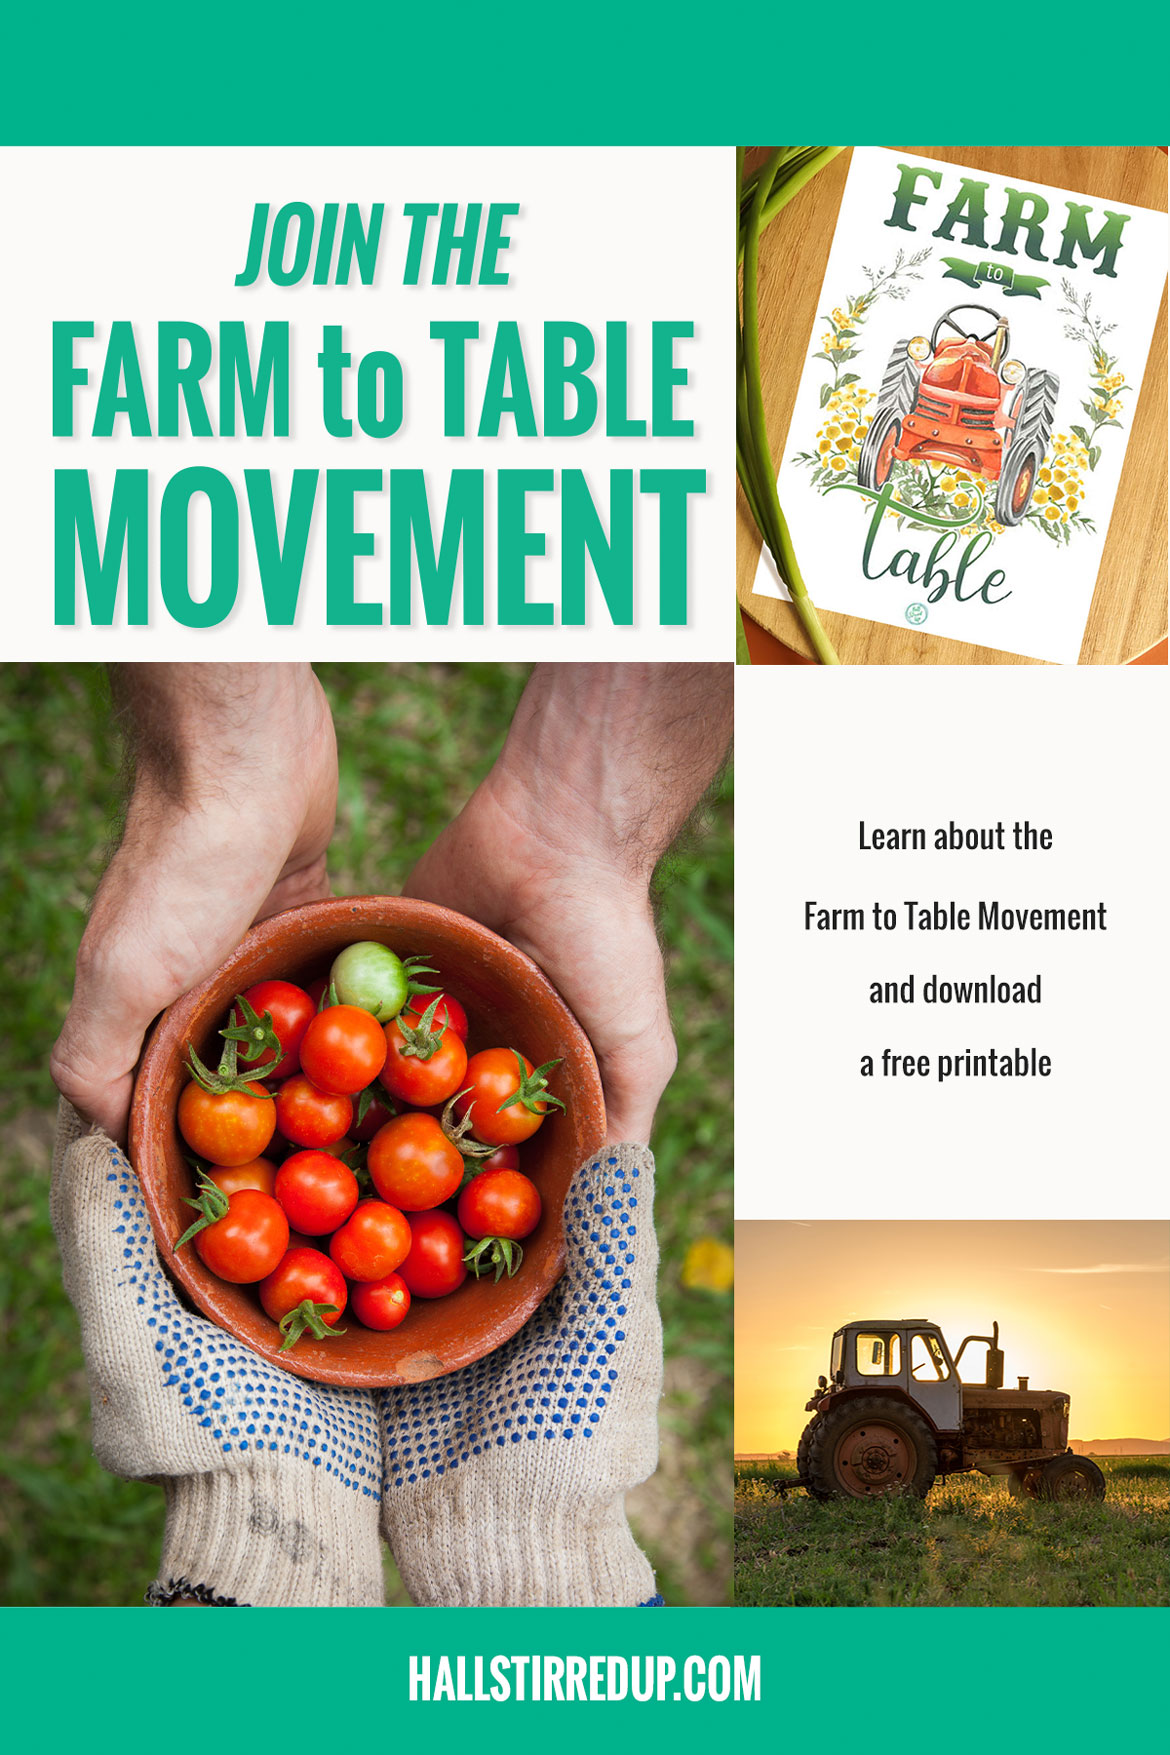 Join the Farm to Table movement Includes free printable